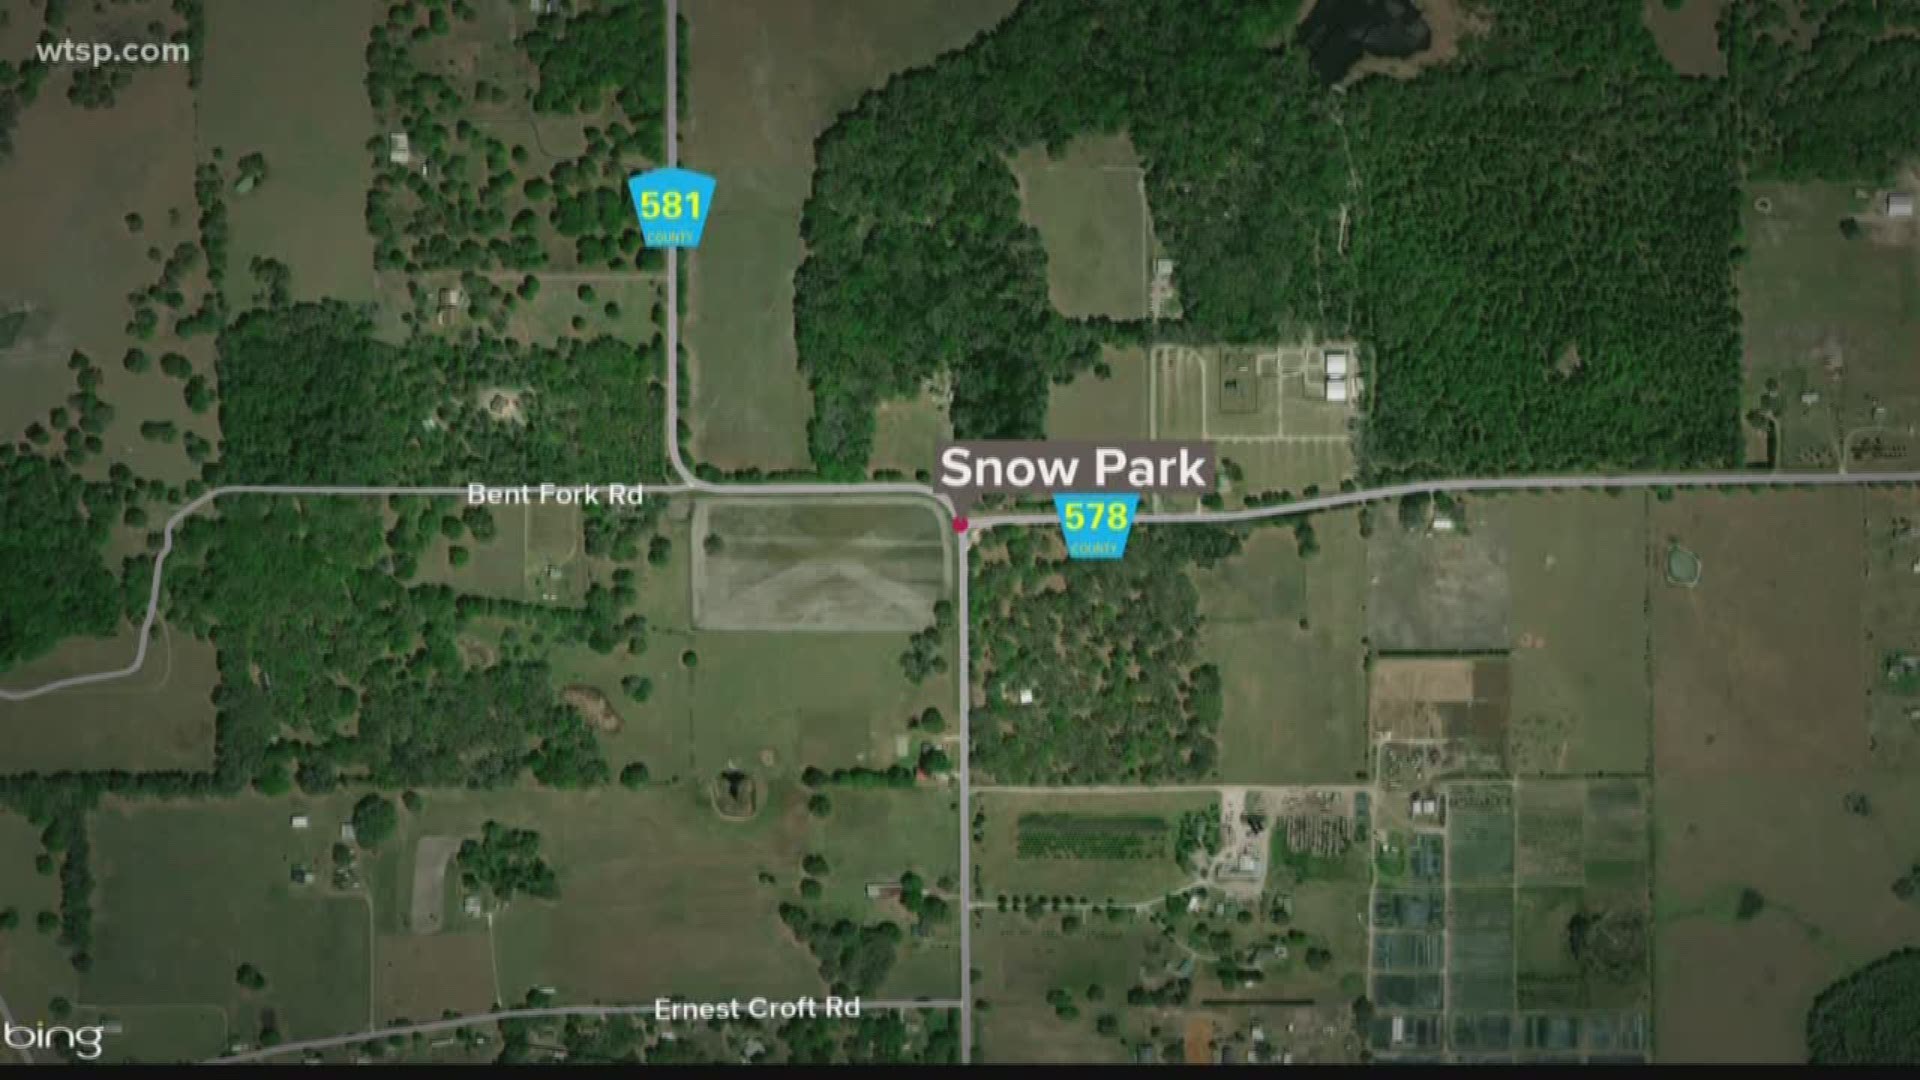 A snow park is heading to Pasco County. The new winter-themed park is slated to open around Christmas of 2020. The park will have snow tubing and all sorts of winter activities.